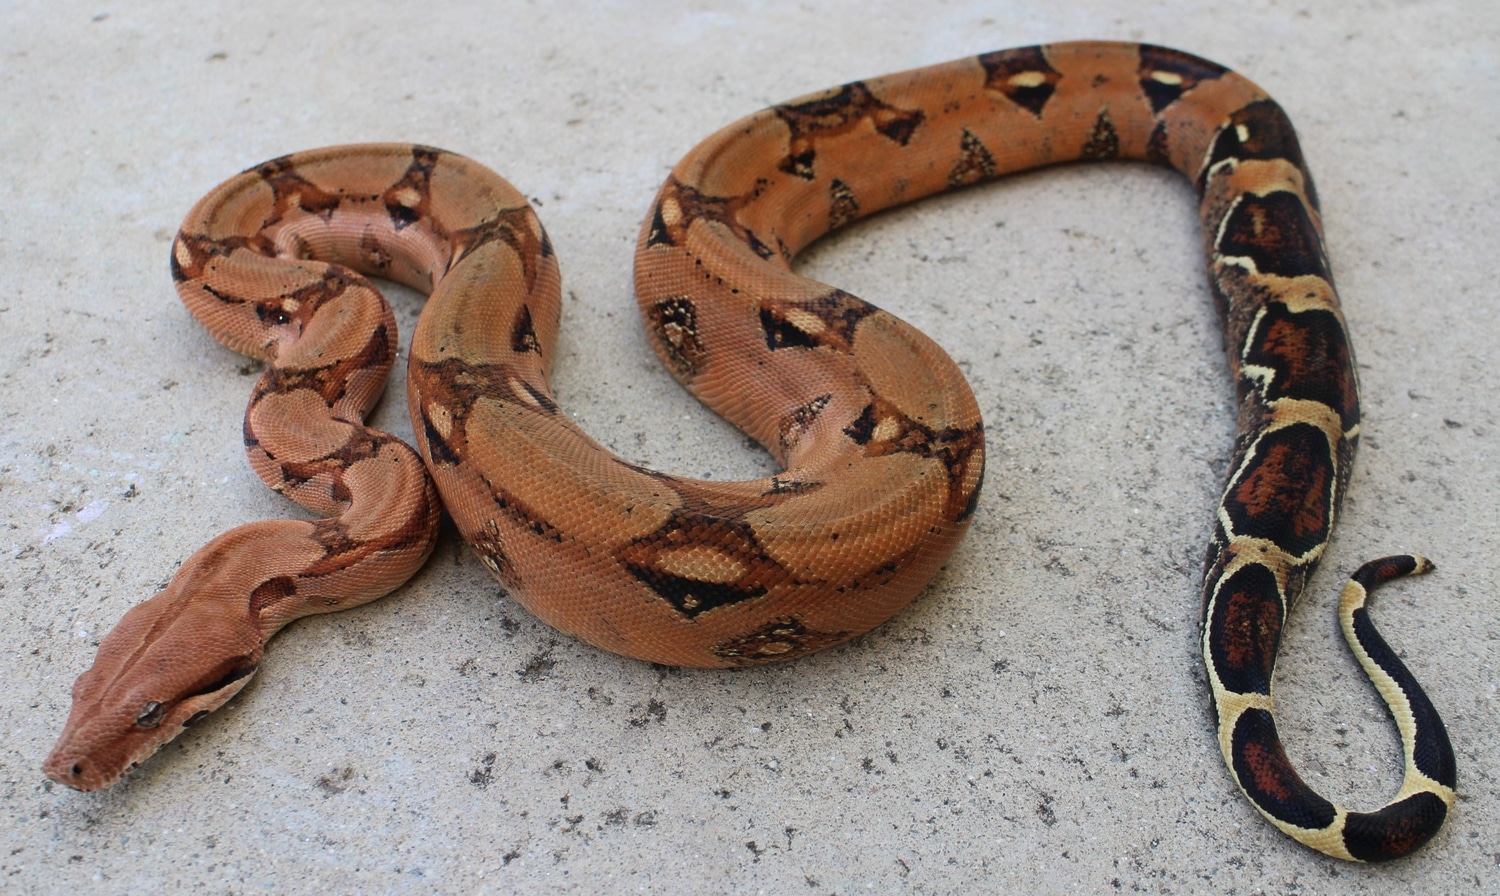 RC Pastel 'Squaretail Litter Boa Constrictor by Richard Ceniceros Reptiles